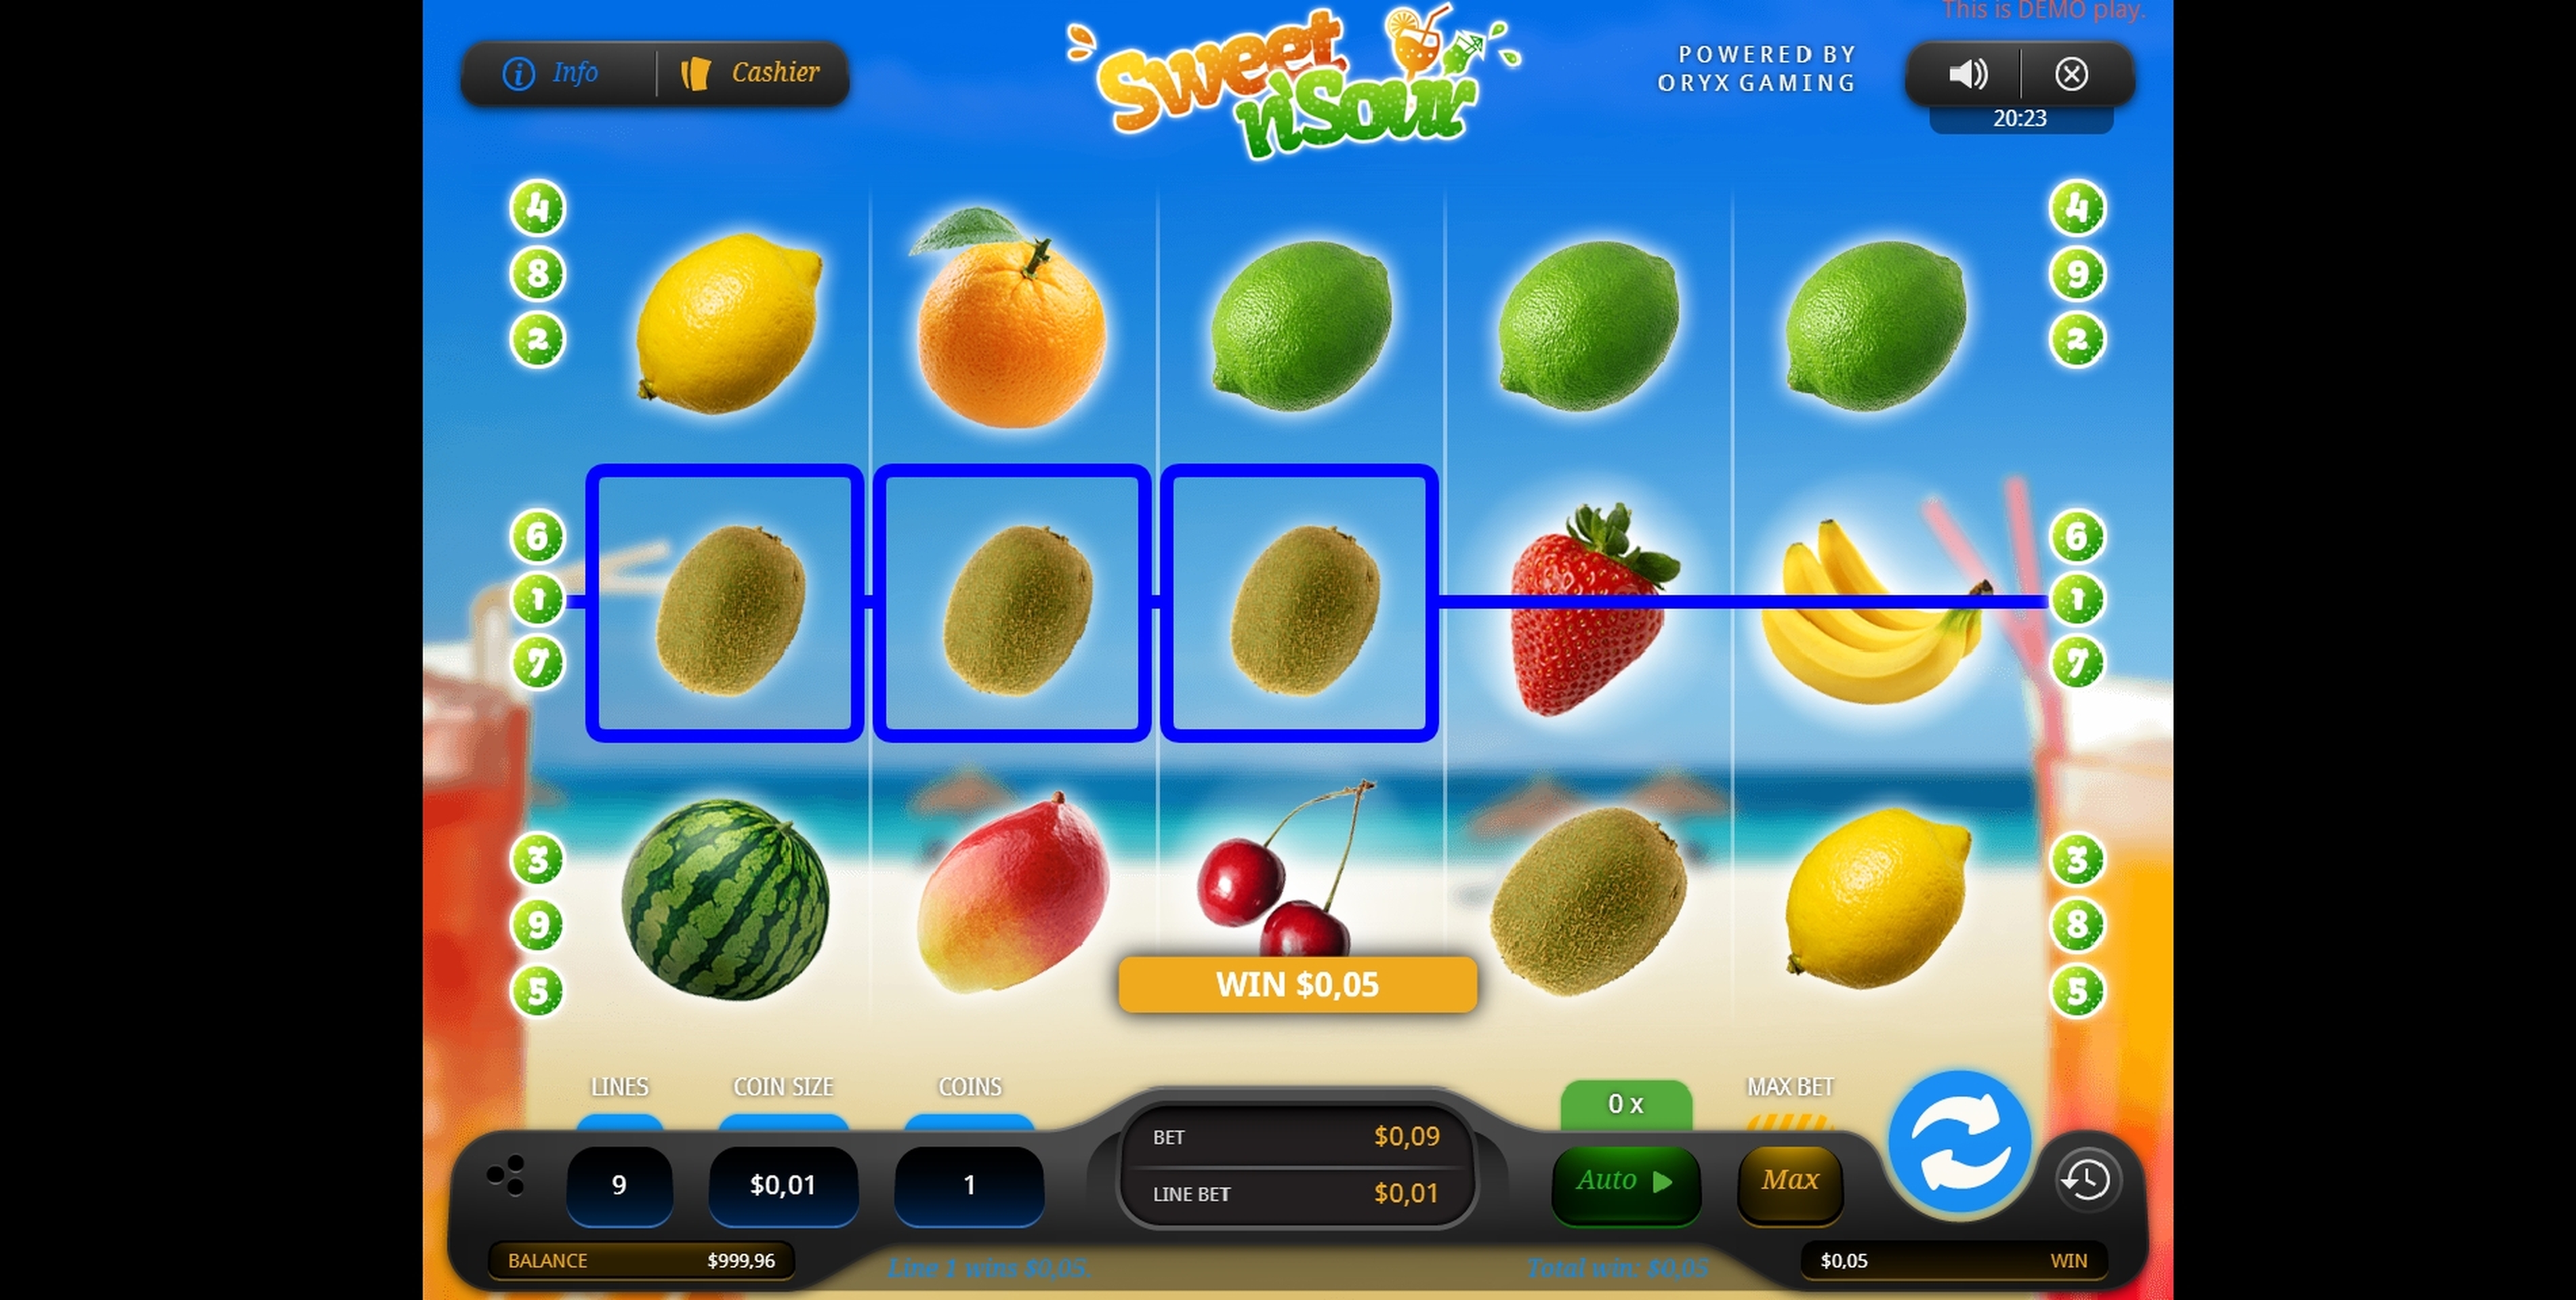 Win Money in Sweet n' Sour Free Slot Game by Oryx Gaming